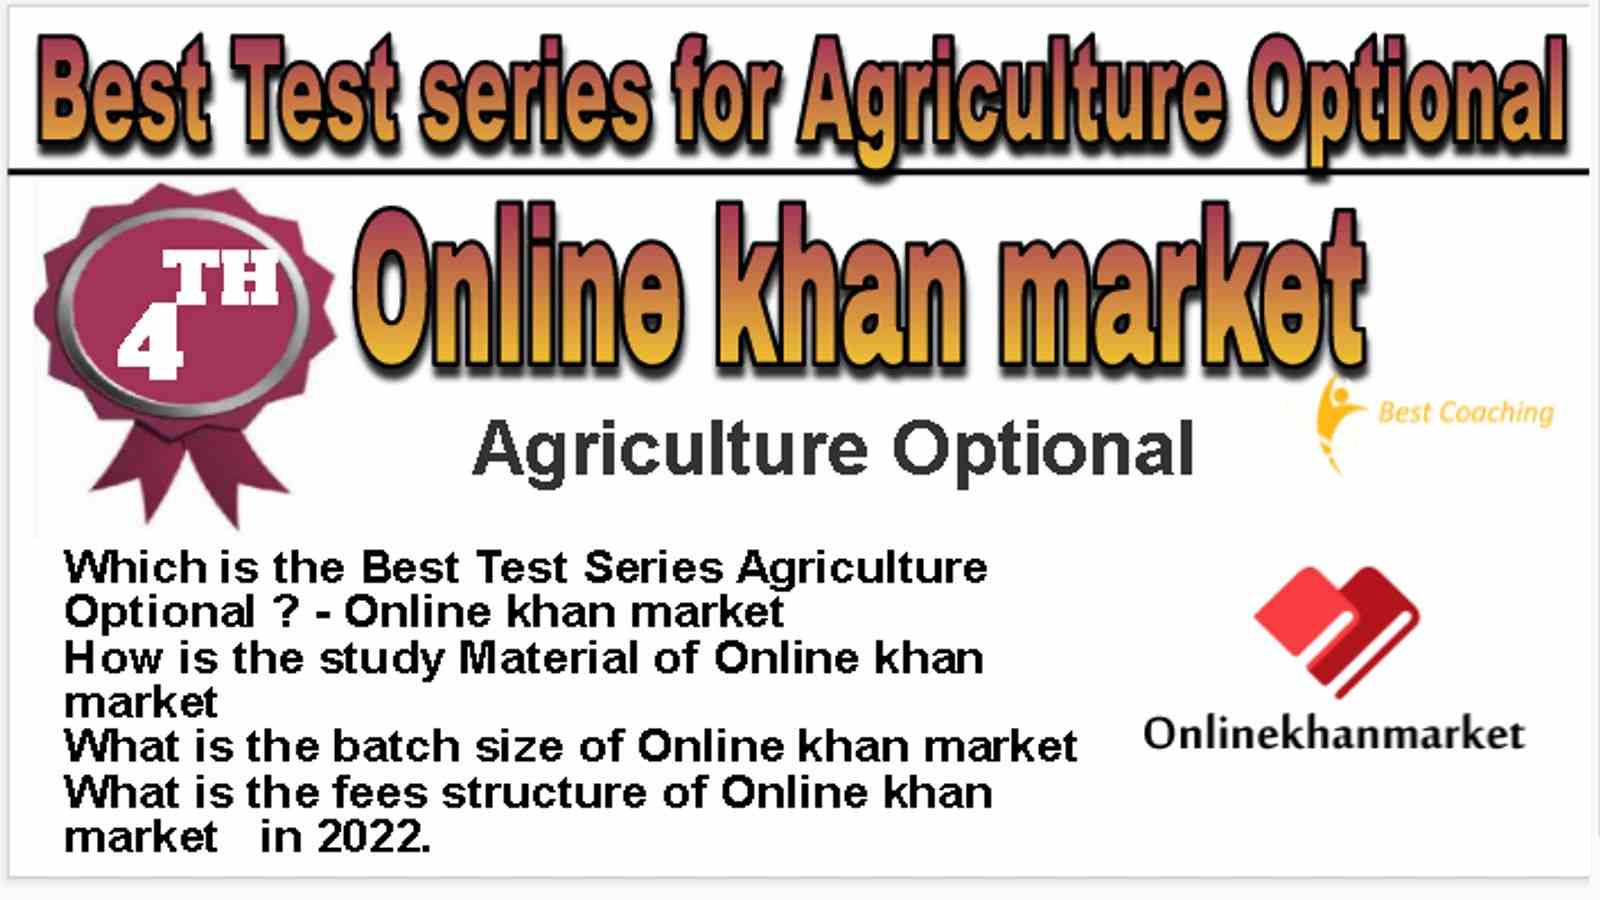 Rank 4 Best Test series for Agriculture Optional